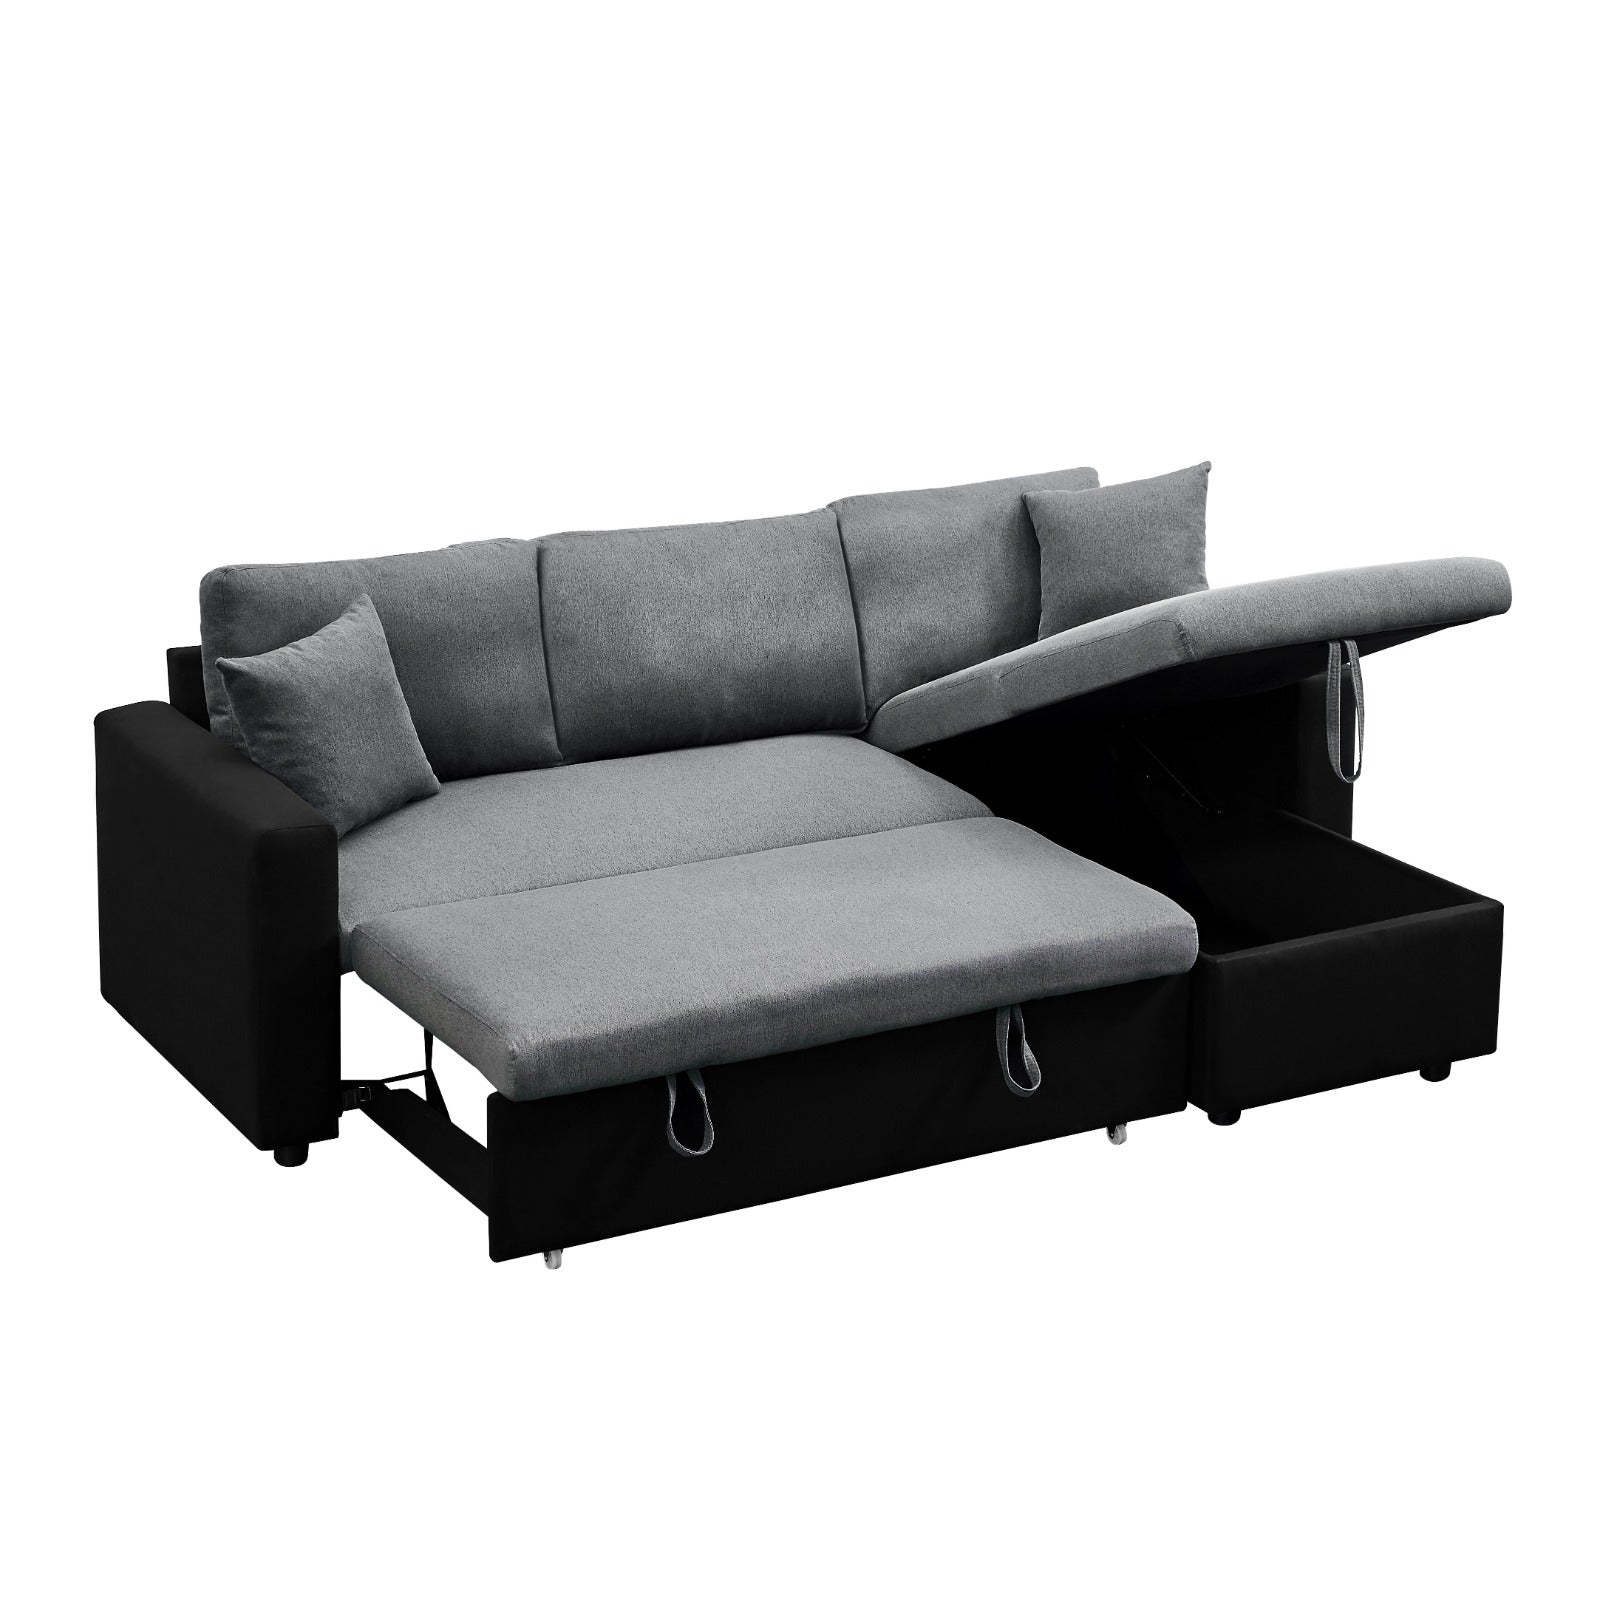 Reversible Grey & Black Pull Out Sectional Sofa Bed With Storage HM1642